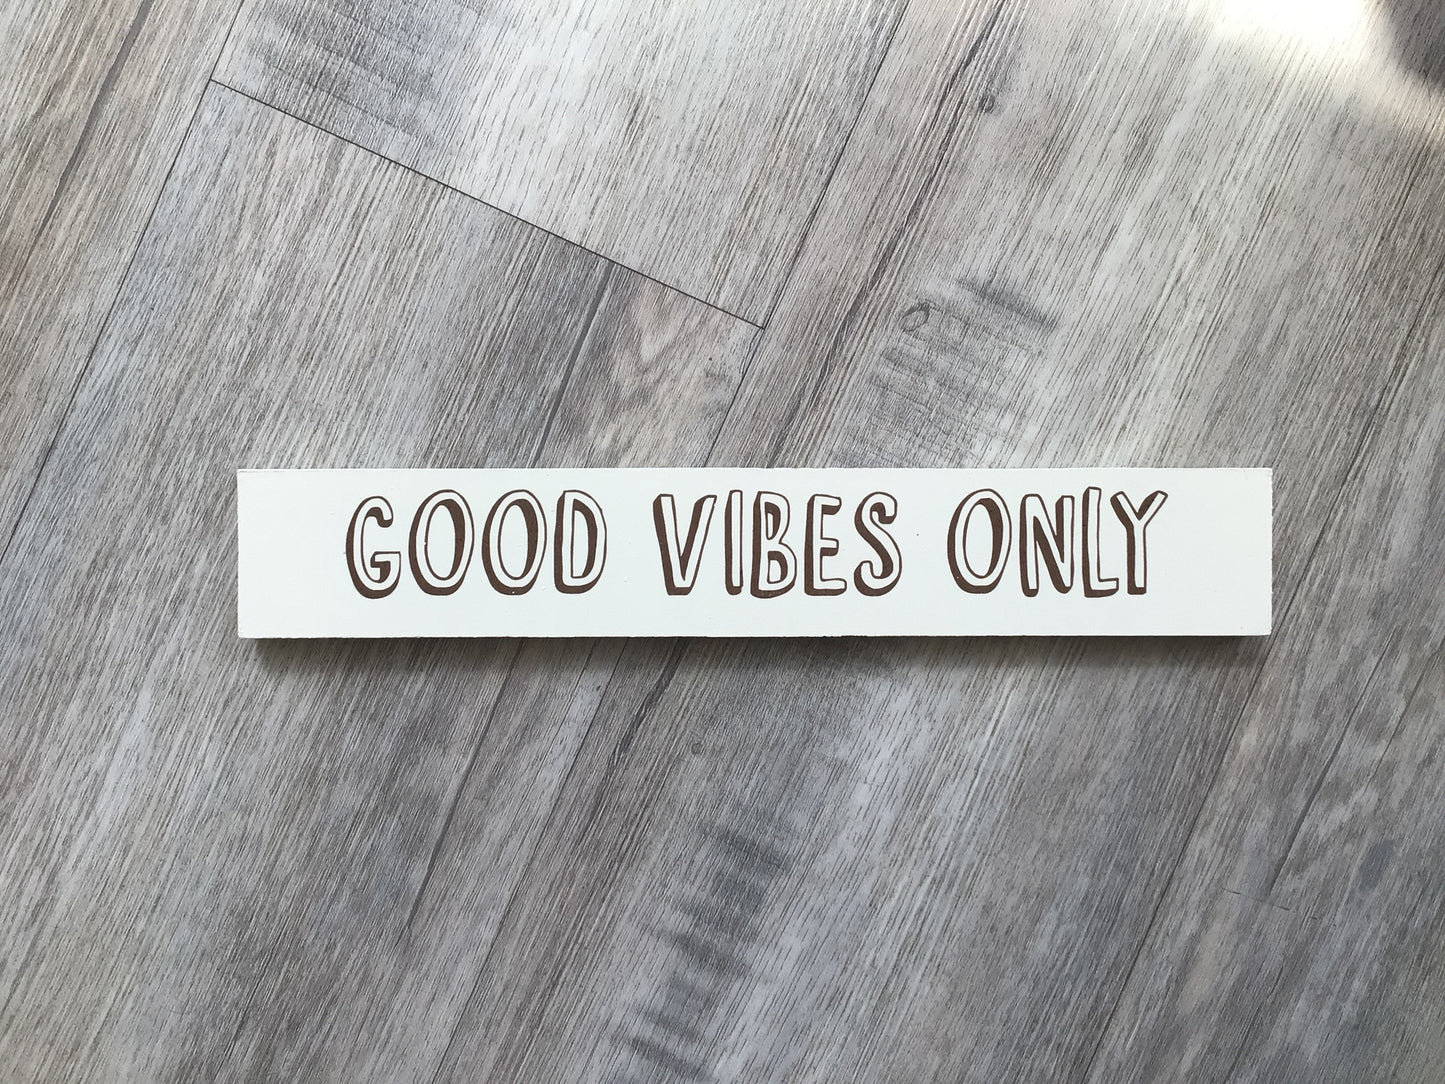 FAS-16 “Good vibes only” Shelf Sitter